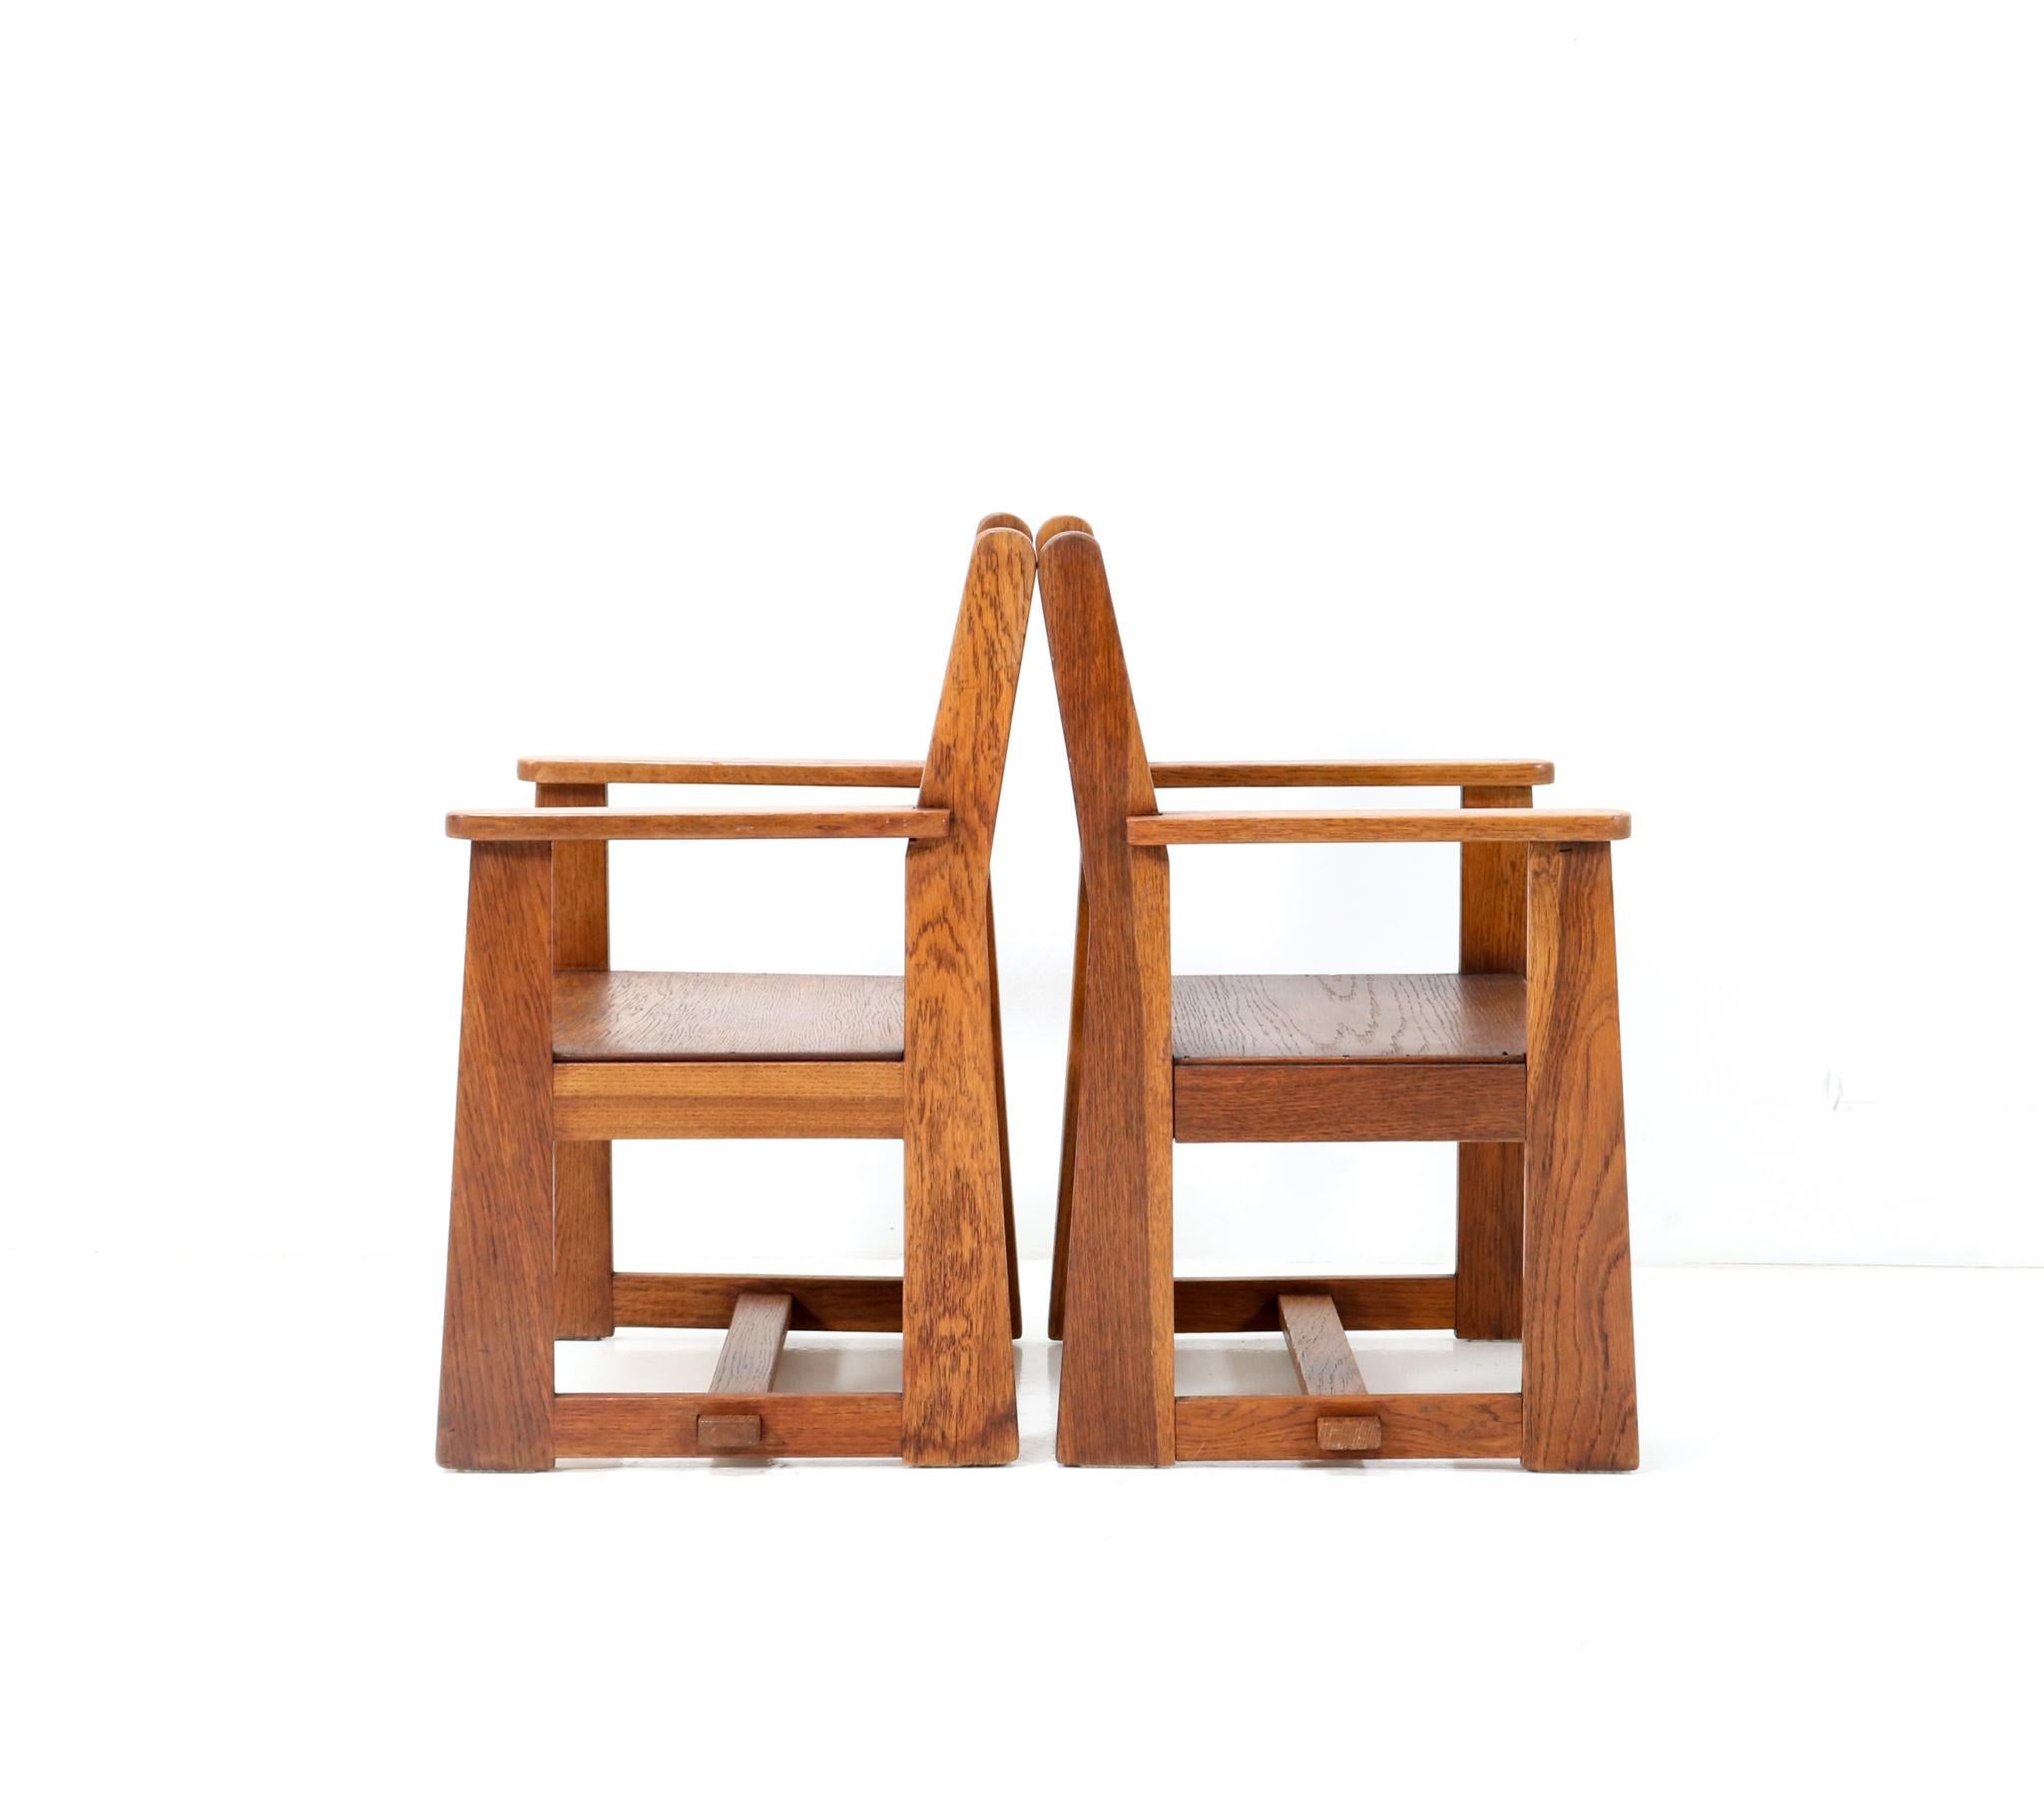 Early 20th Century Two Art Deco Modernist Children's Armchairs by Jan Wils for Eik en Linden, 1918 For Sale